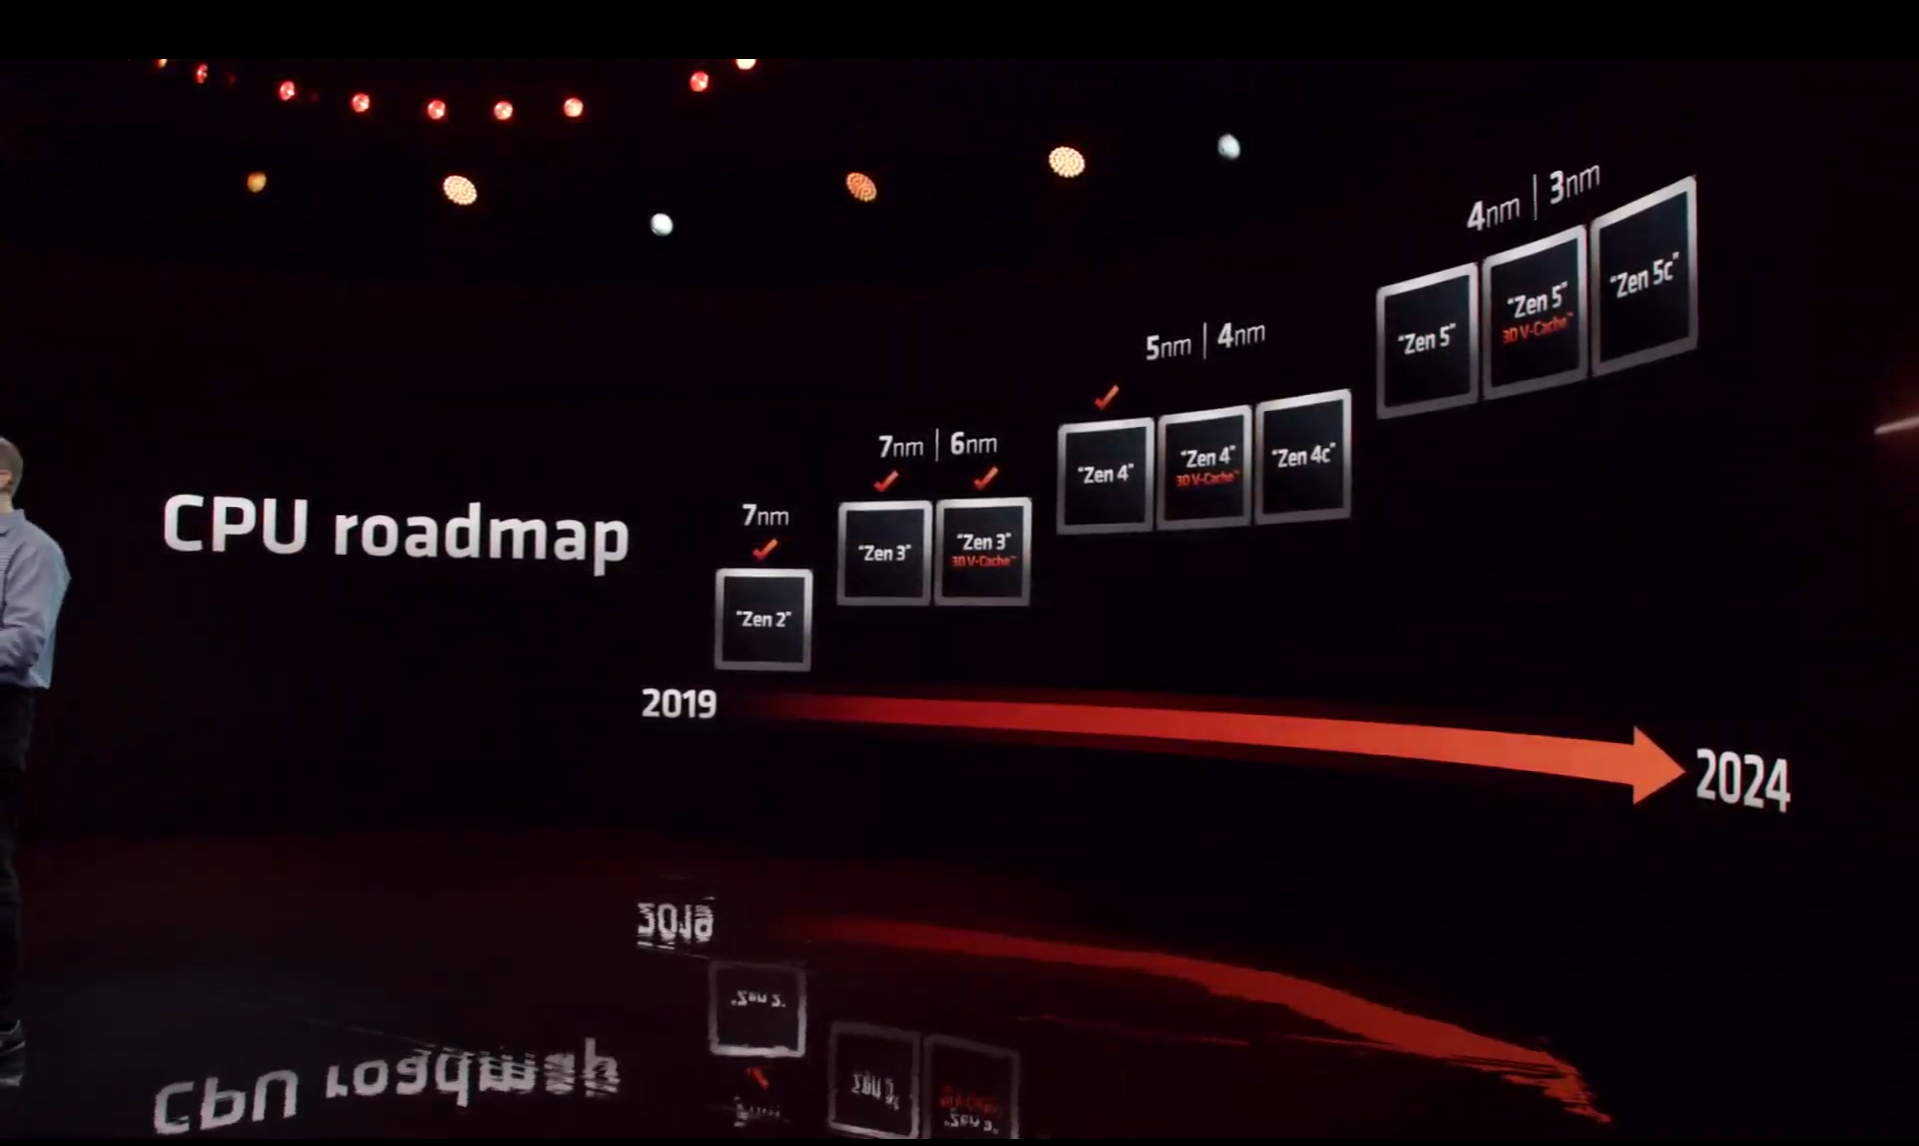 Papermaster shows a processor roadmap